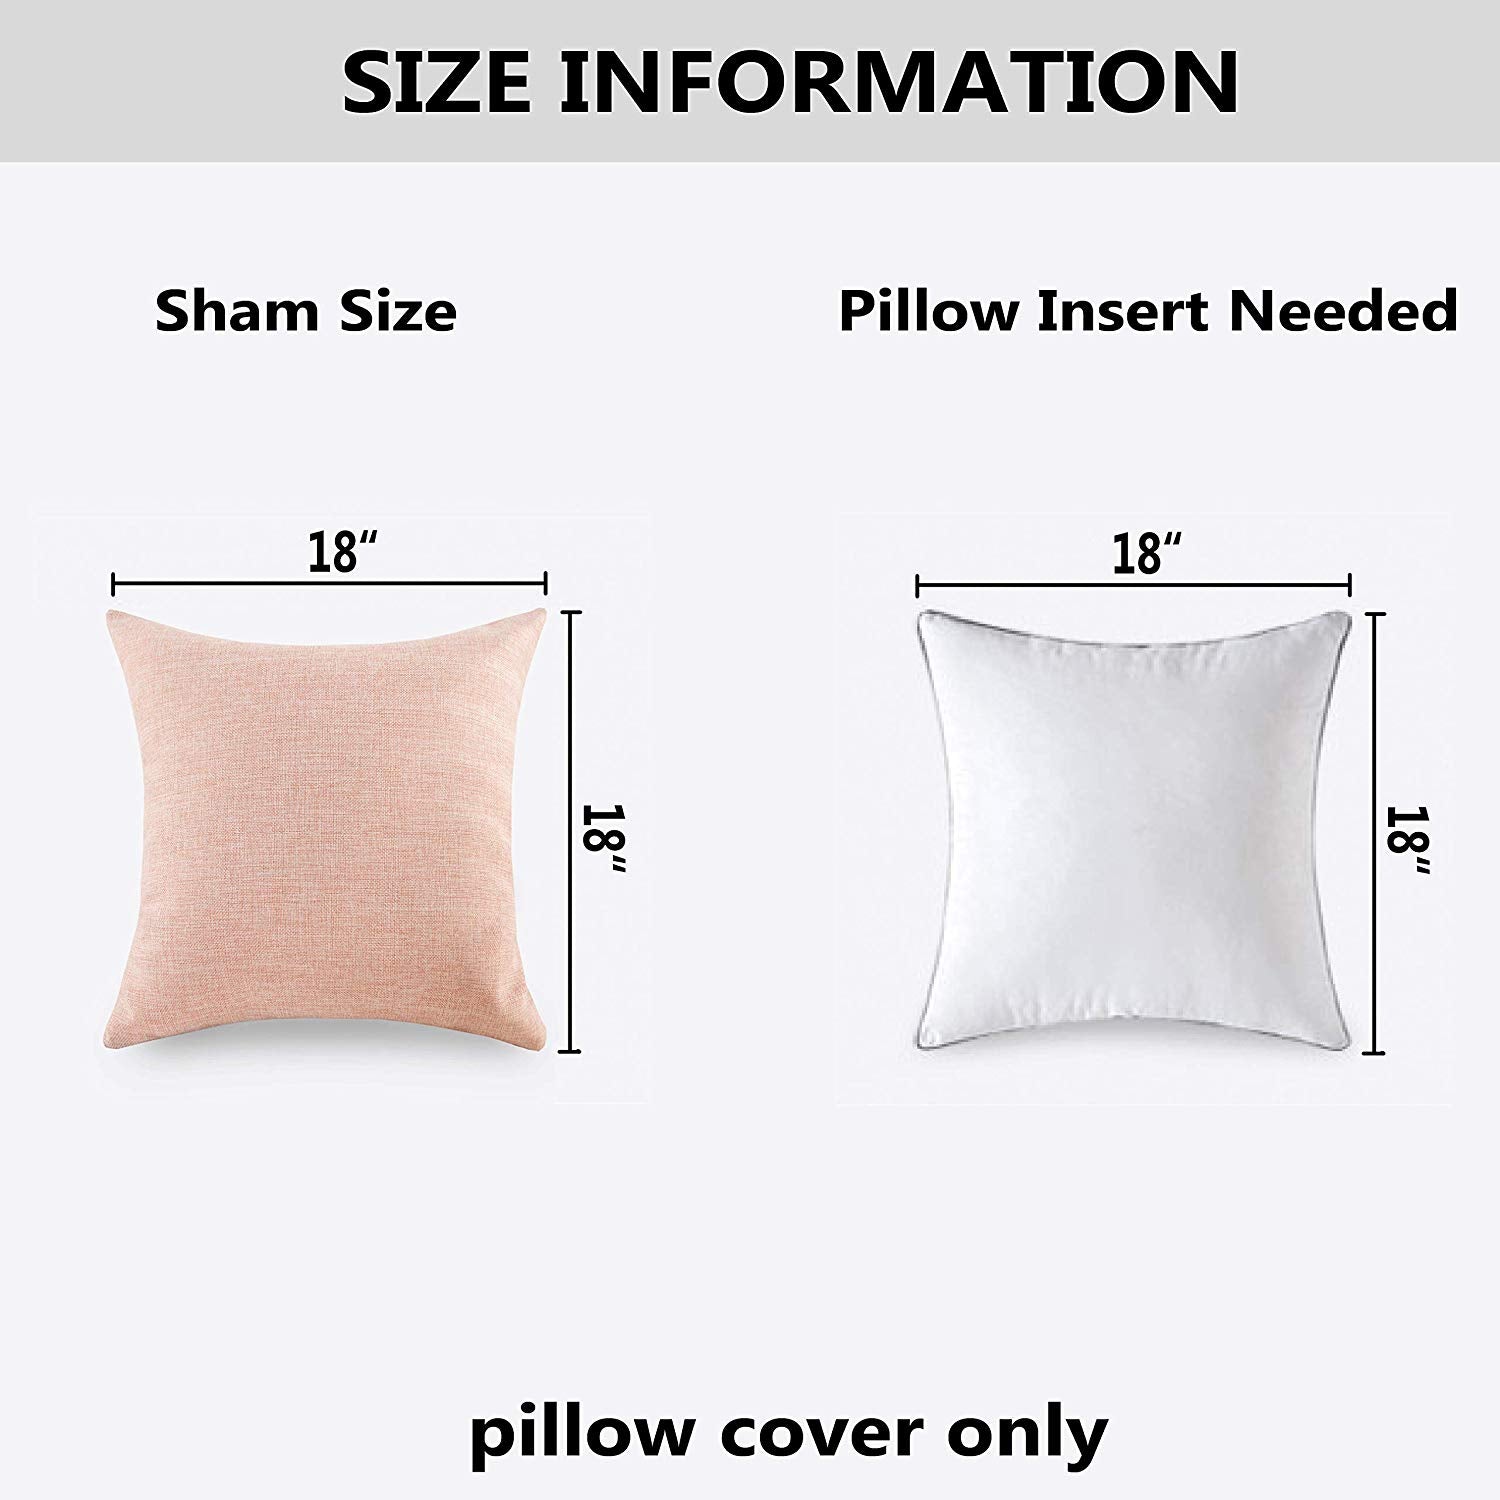 HOME BRILLIANT 2 Pack Valentines Decor Velvet Cushion Covers Set Throw Pillow Cases Covers Square Decorative Pillowcases, 18 x 18 inches(45x45 cm), Blush Pink